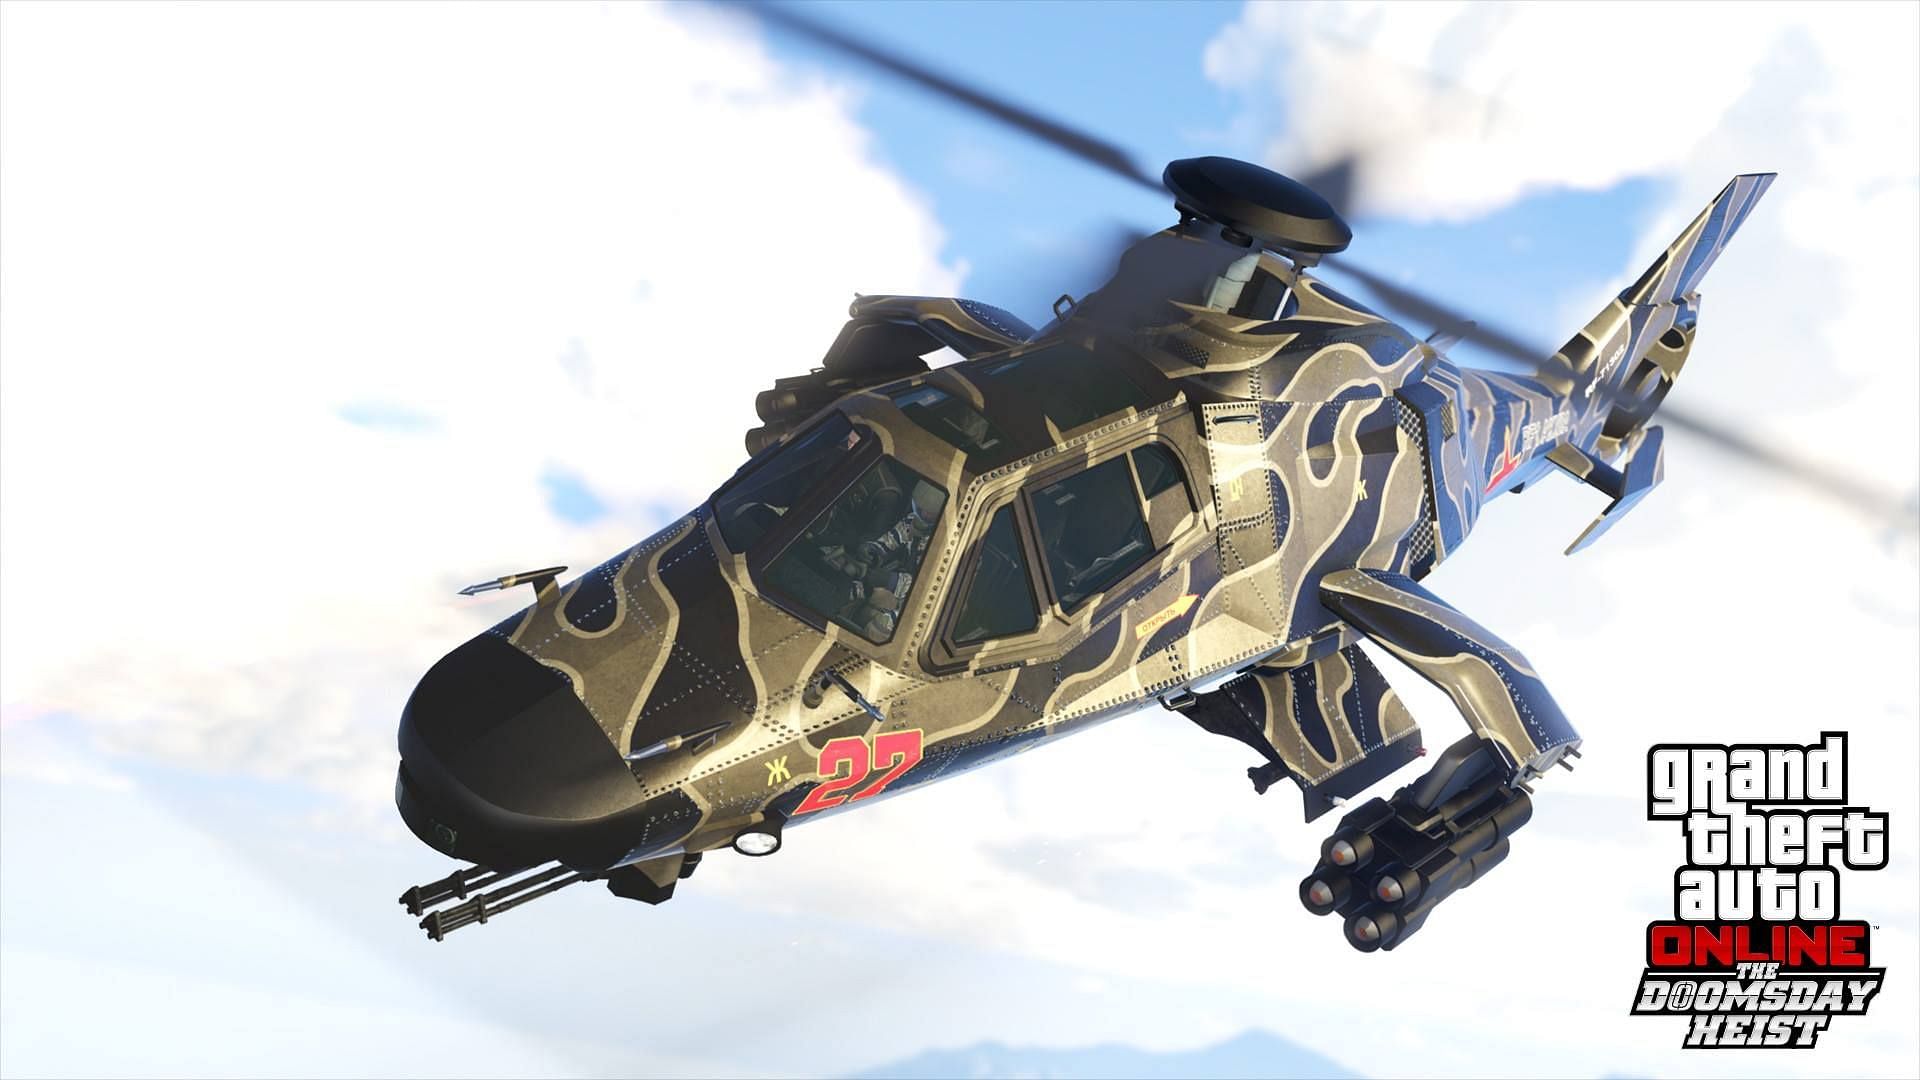 This helicopter debuted in The Doomsday Heist update several years ago (Image via Rockstar Games)